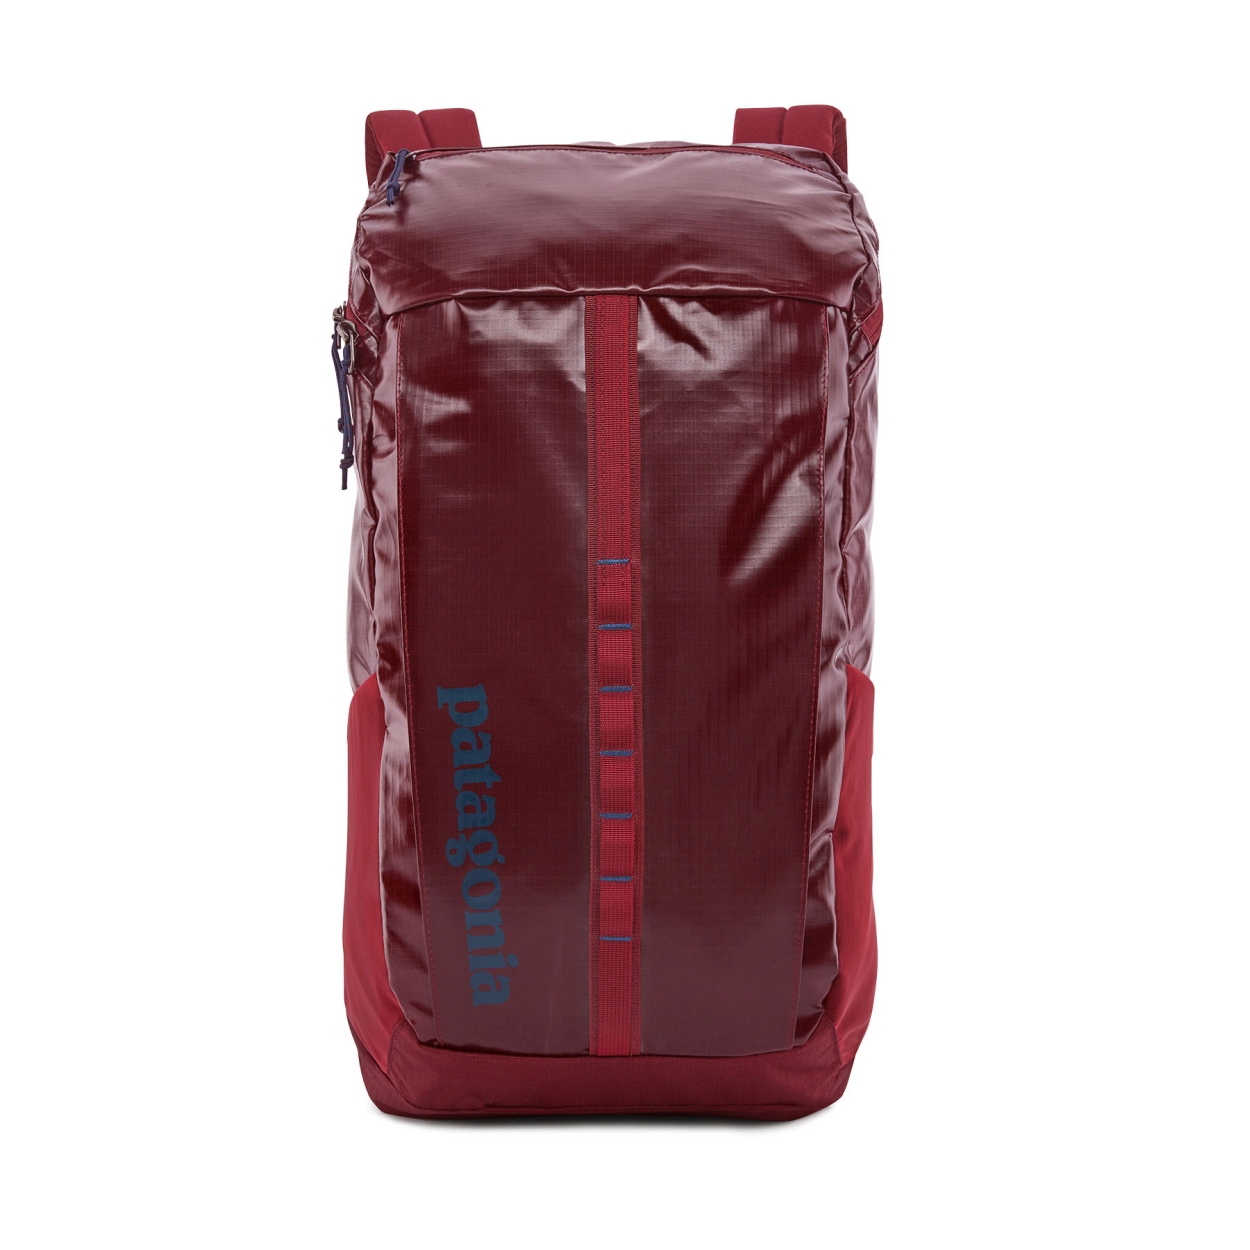 Black Hole Pack 25L, wax red